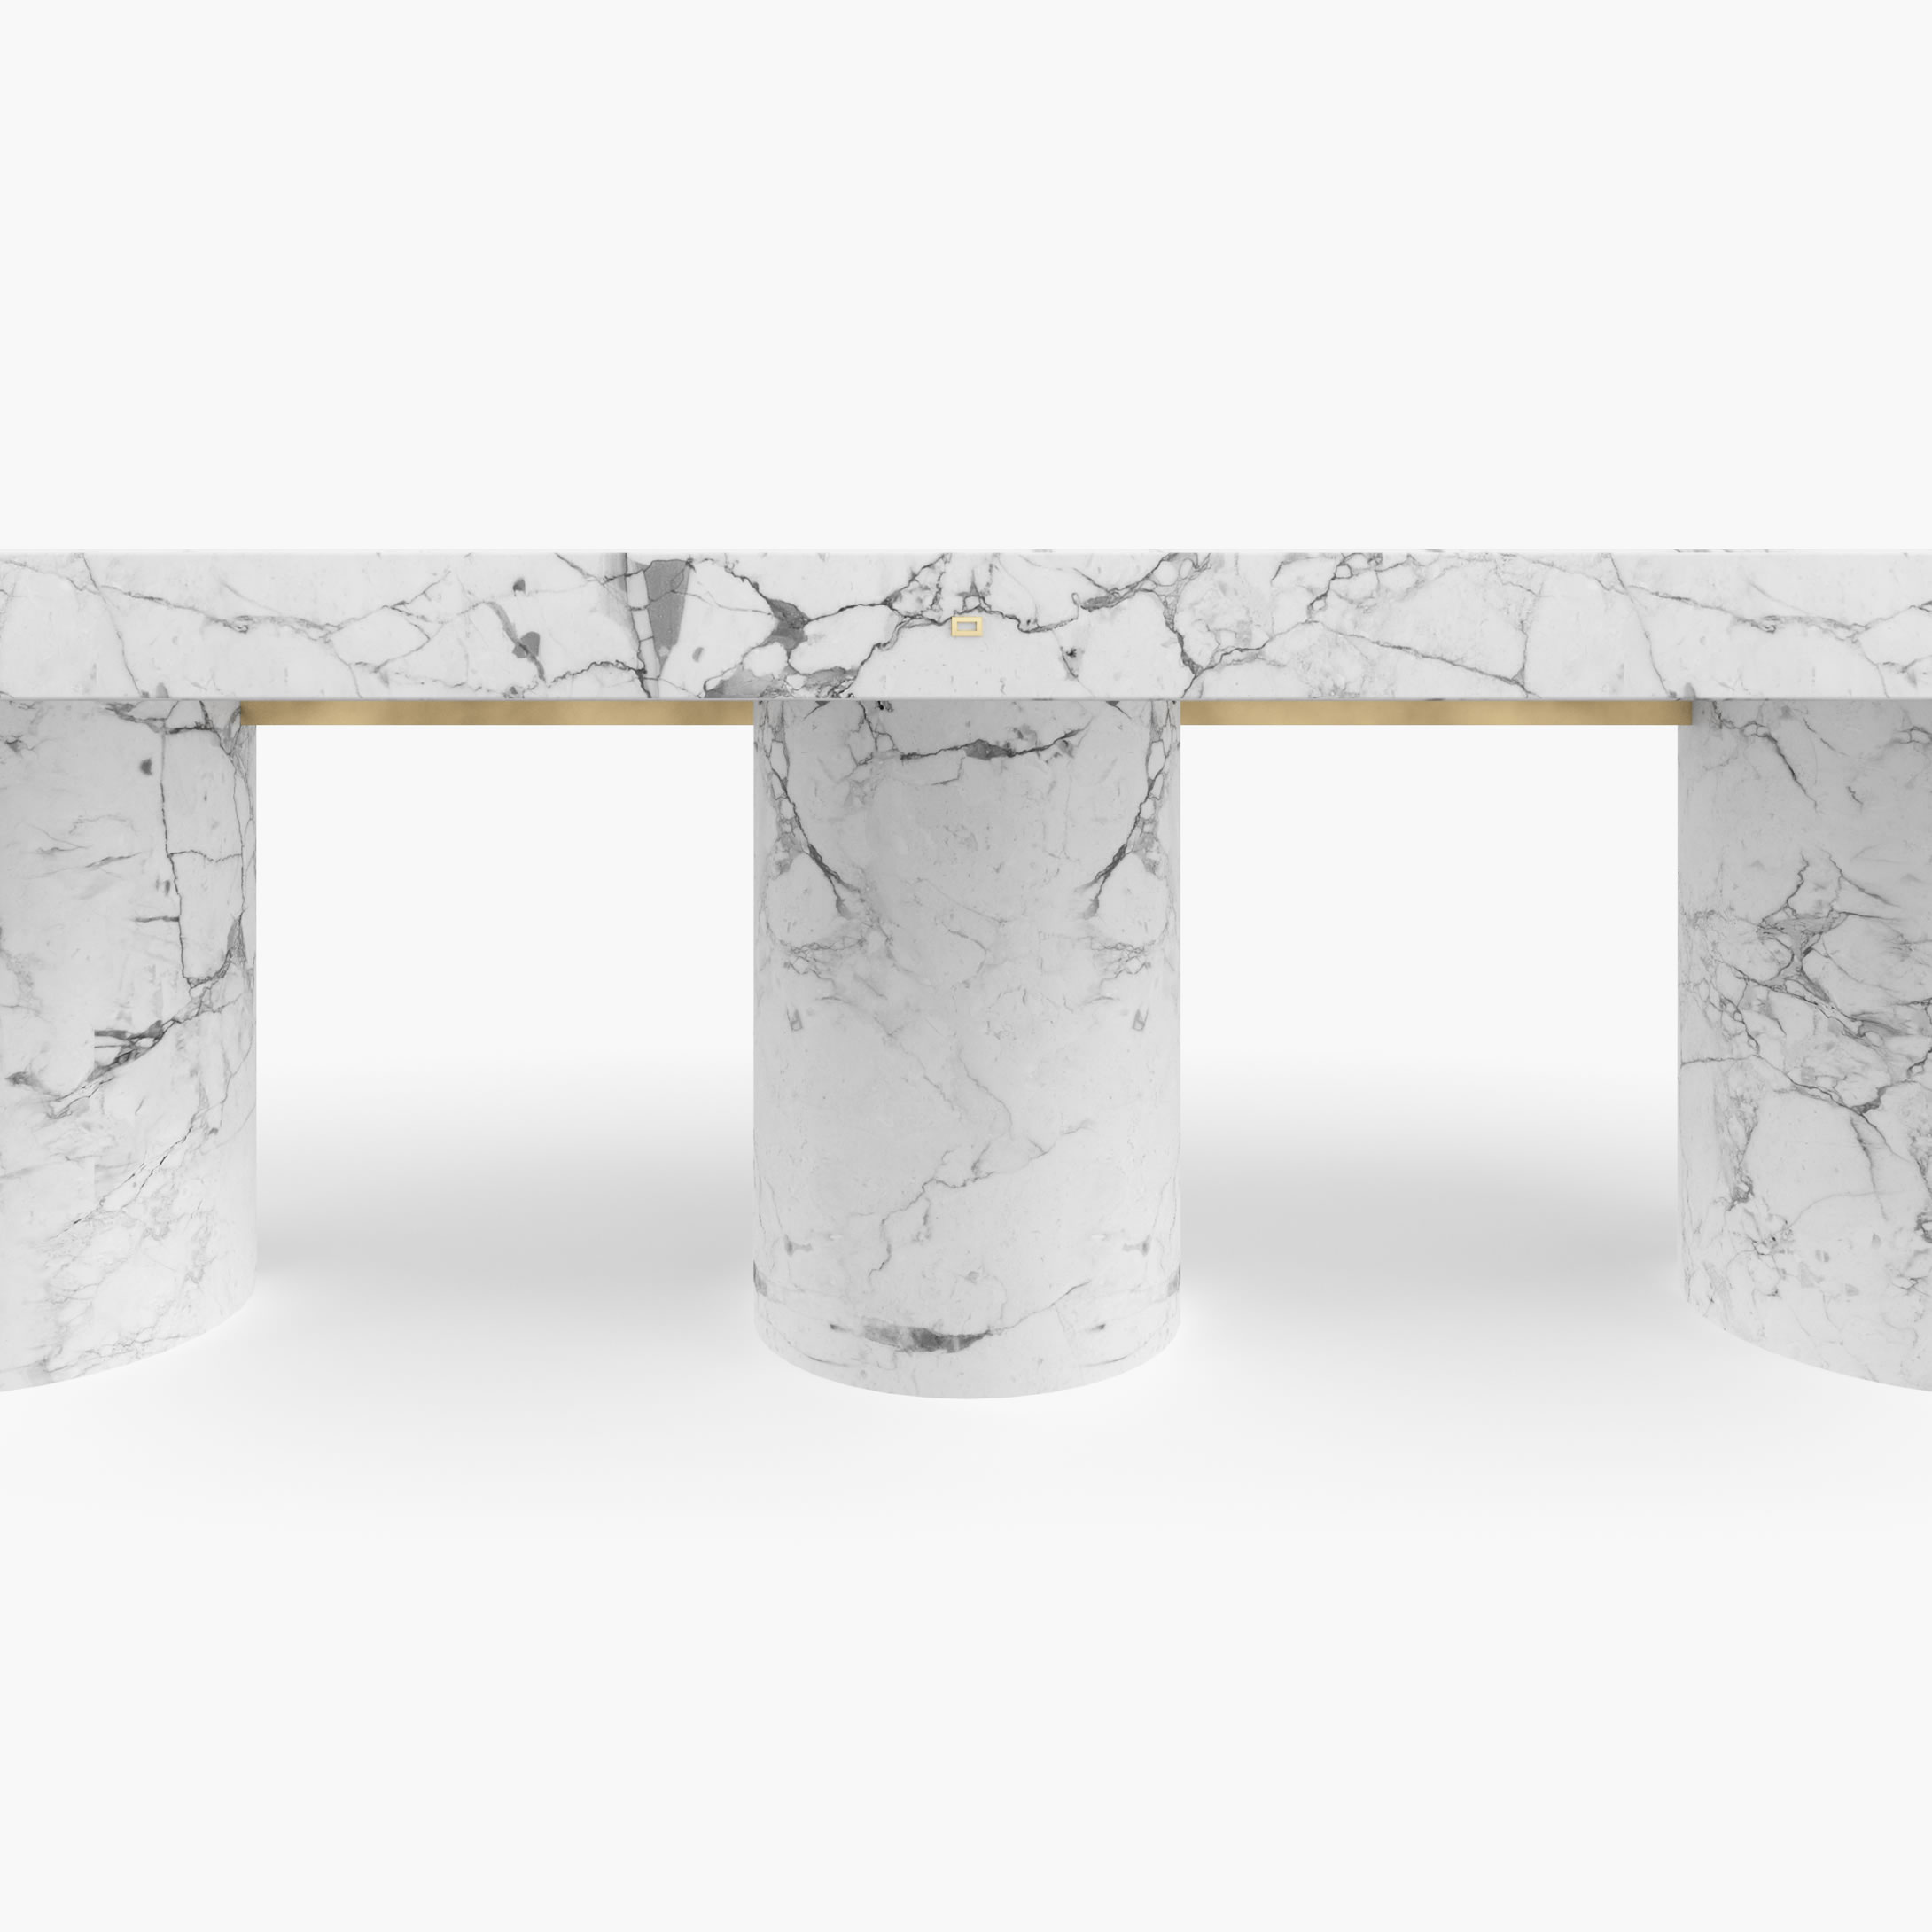 Dining Table Cylinder legs White Arabescato Marble timeless Dining Room art work Dining Tables FS 173 FELIX SCHWAKE